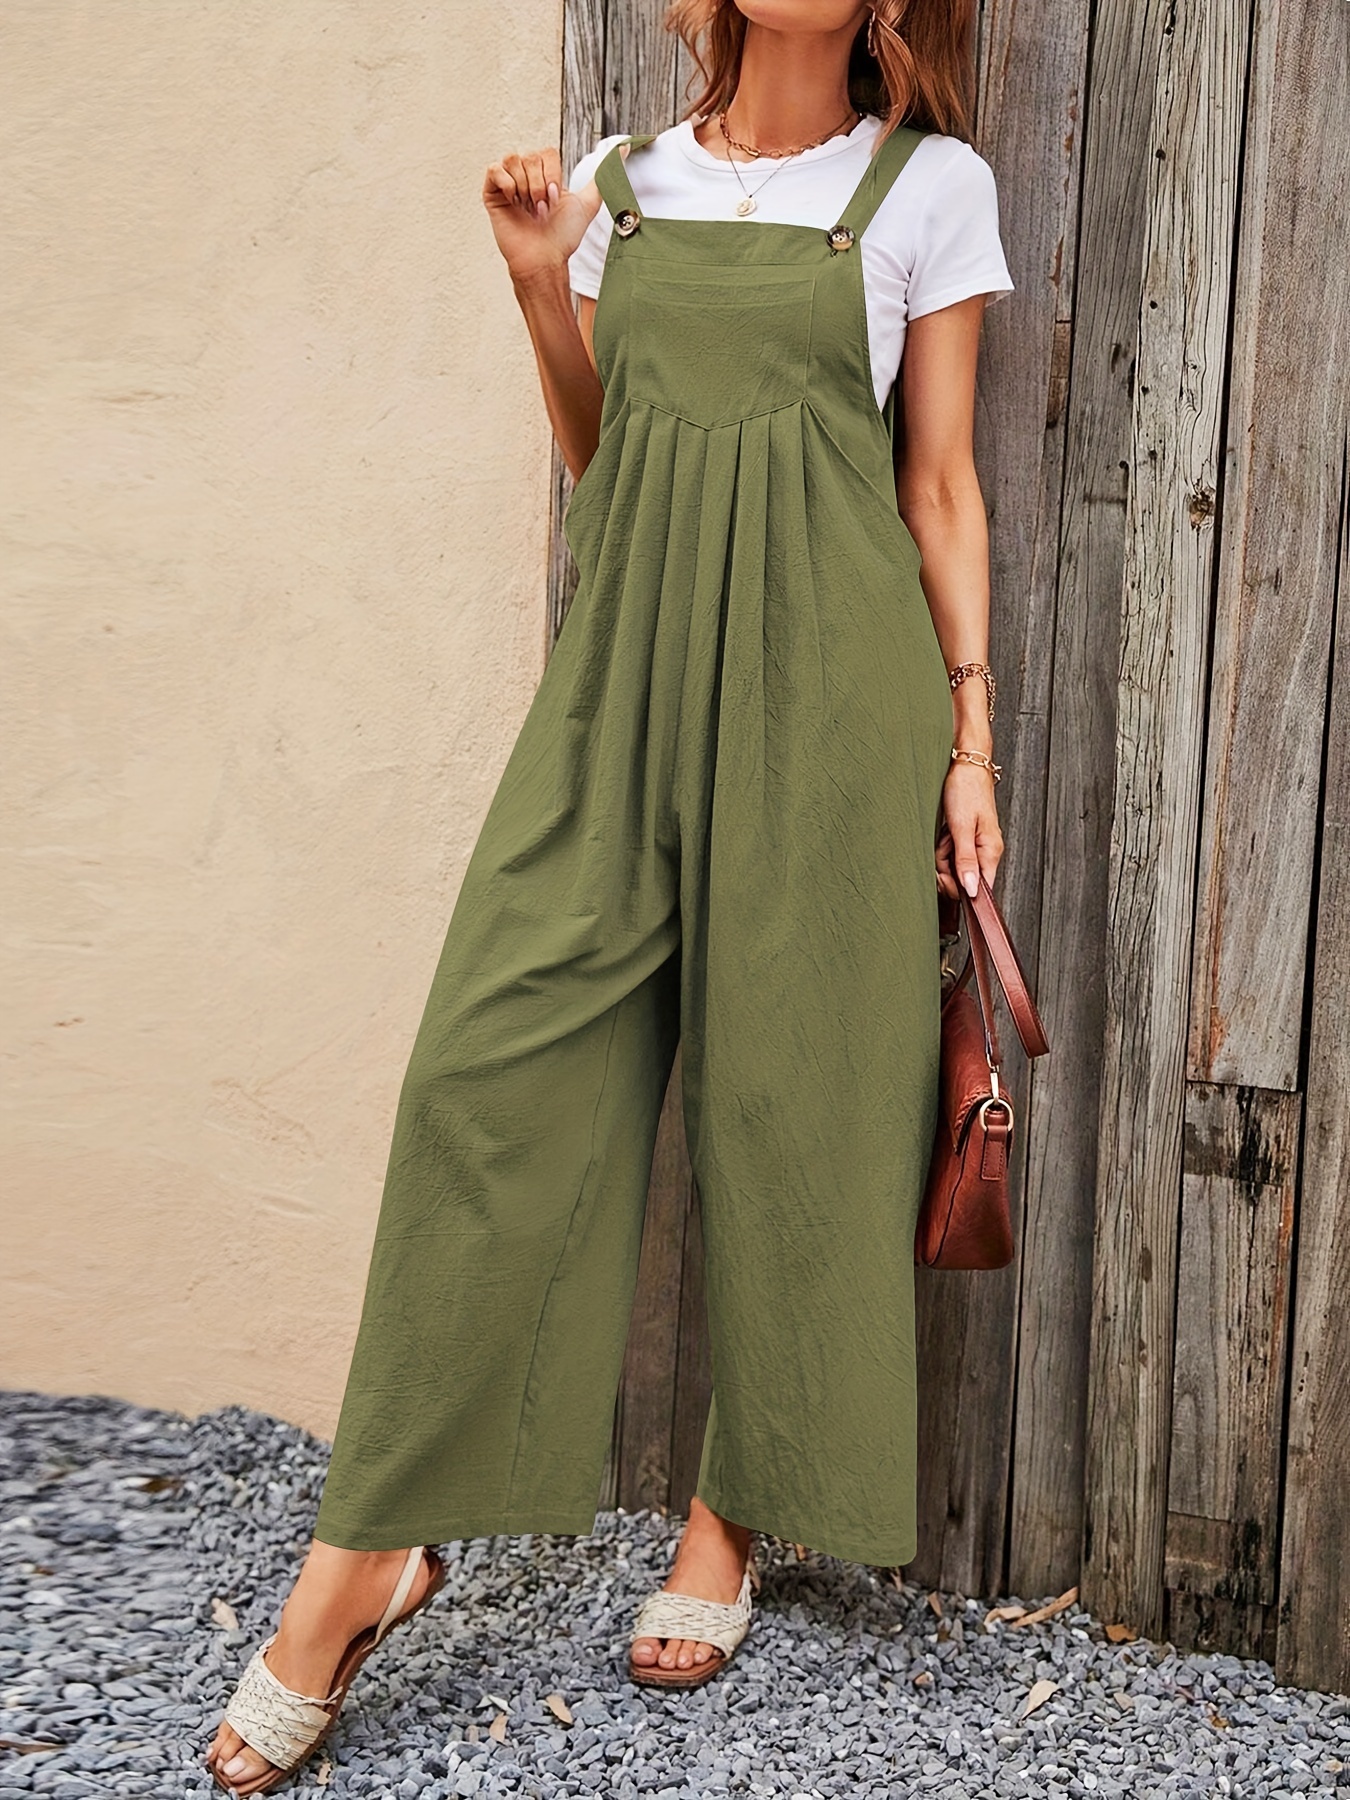  Kcocoo Womens Casual Jumpsuits Summer Rompers Sleeveless Loose  Fit Overalls Spaghetti Strap Jumpers with Pockets(Green,S) : Clothing,  Shoes & Jewelry